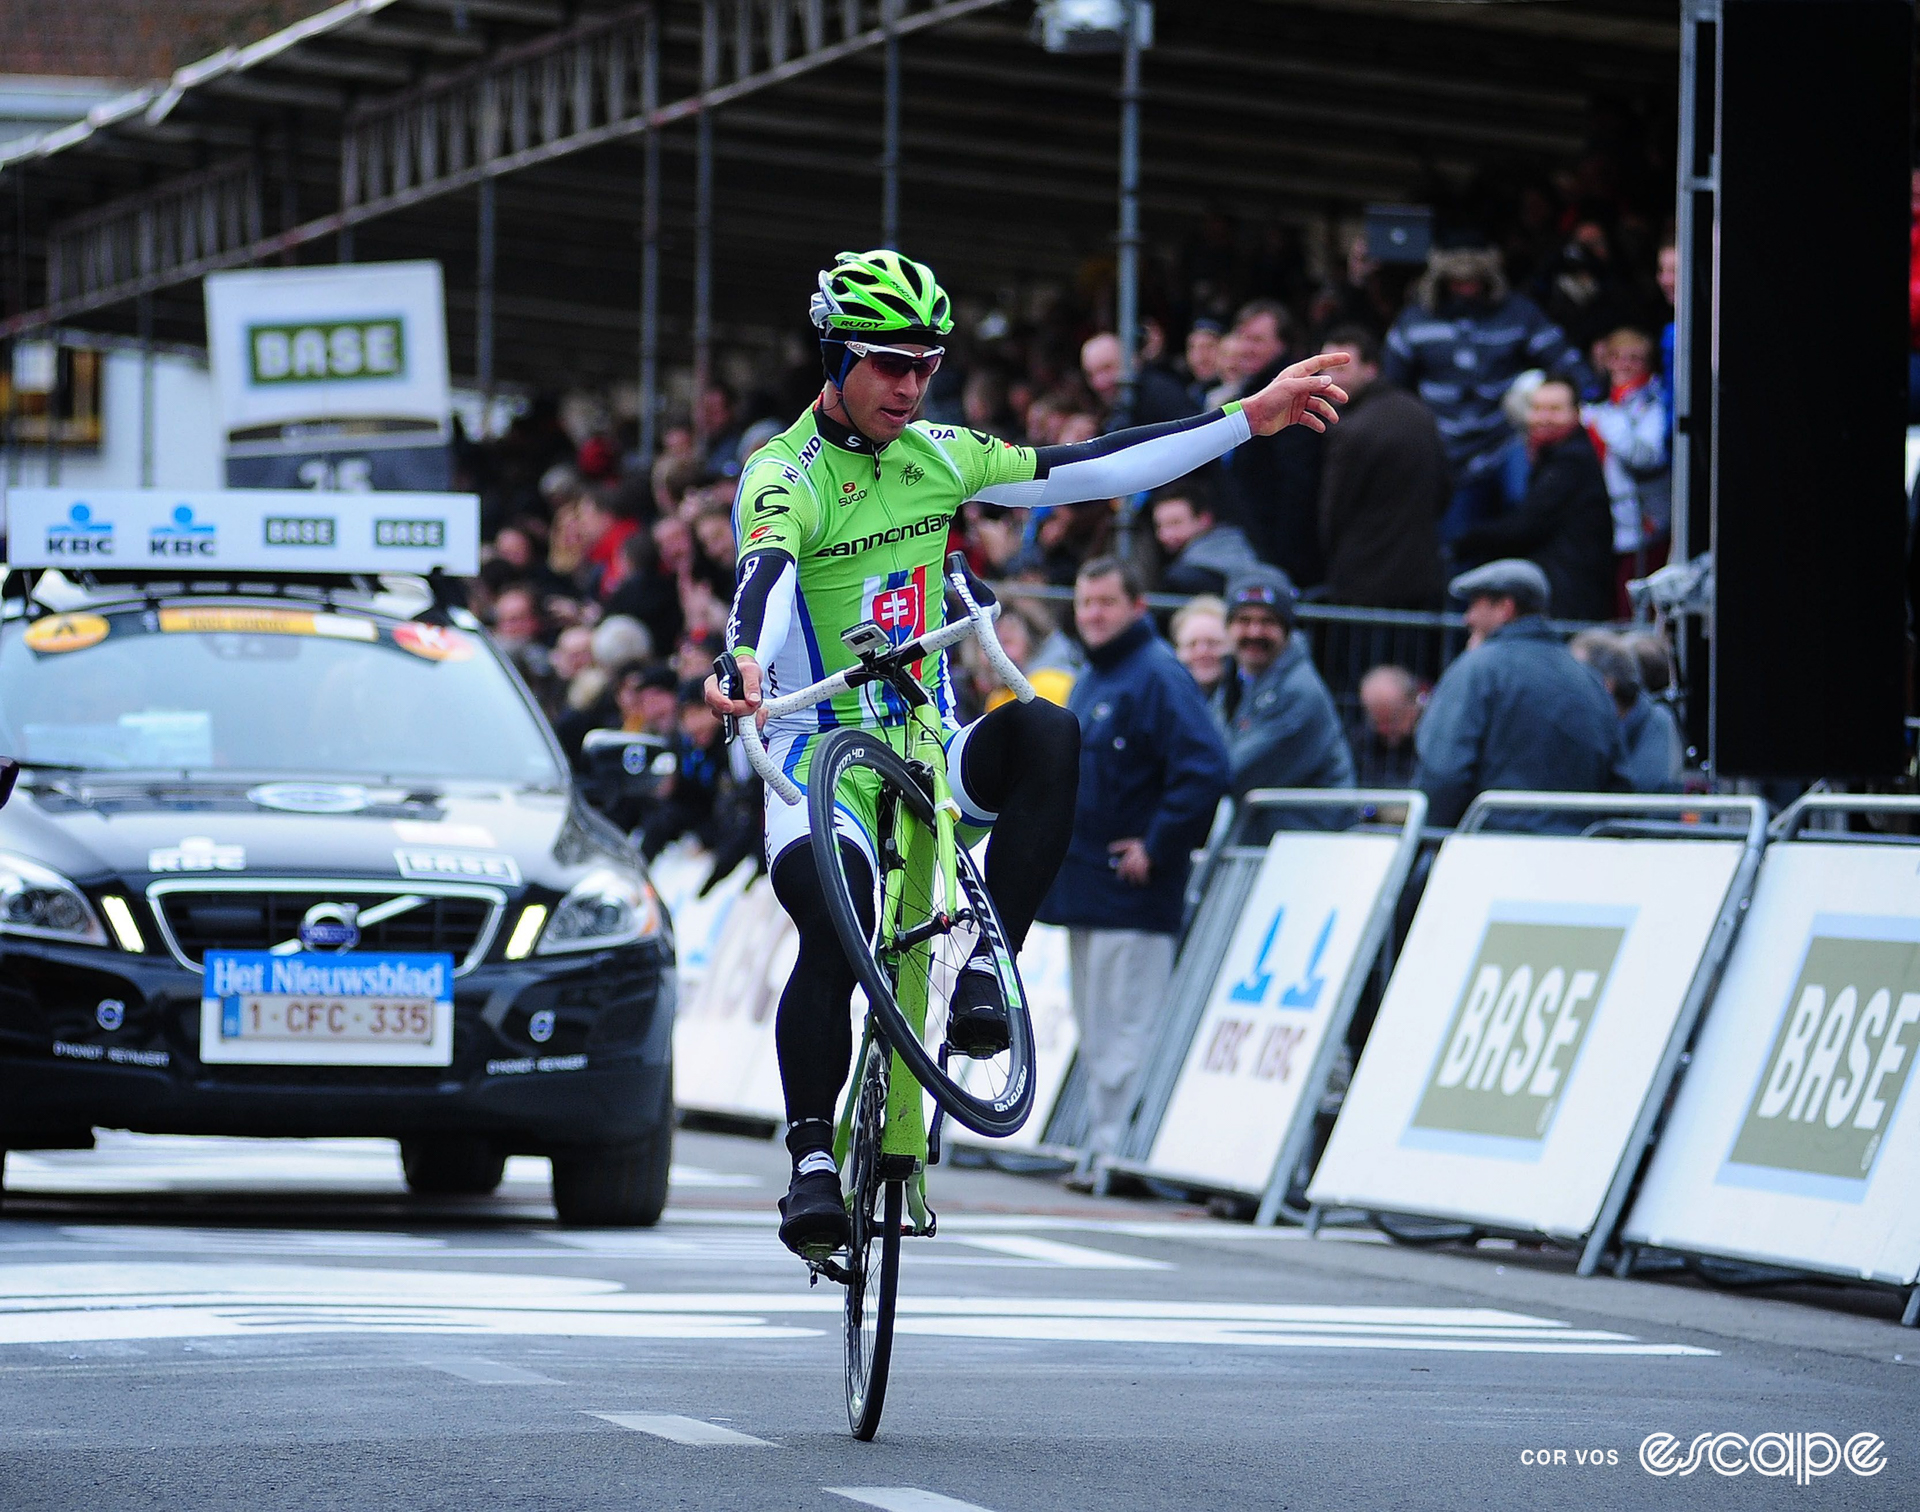 Peter Sagan celebrates winning the 2013 Gent-Wevelgem by doing a wheelie just past the finish line.